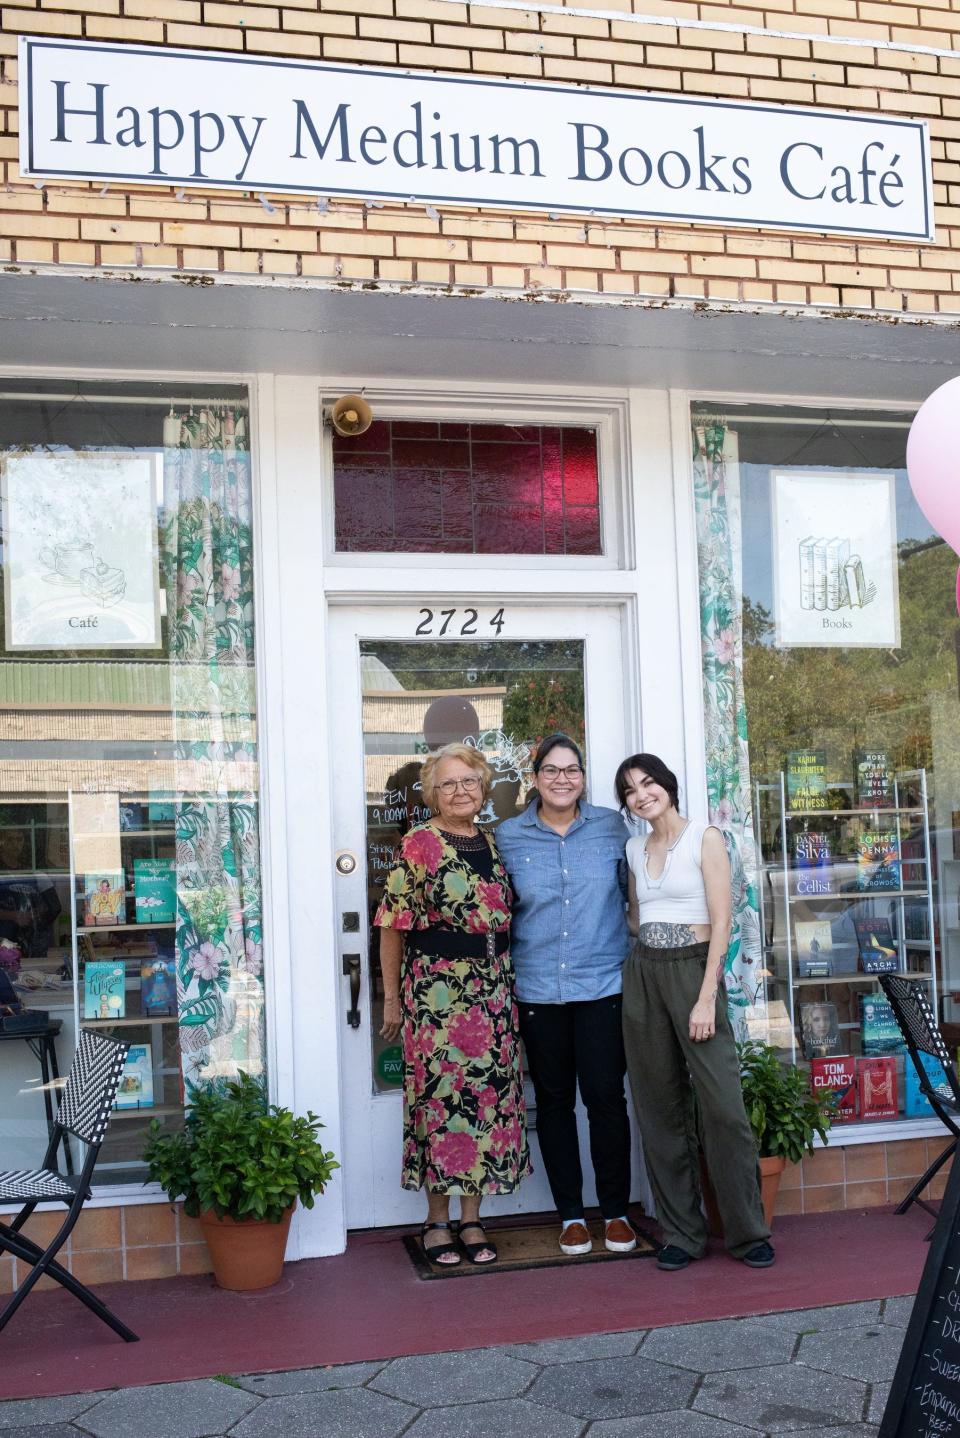 Happy Medium Books Cafe in Jacksonville, Florida is helmed by three generations of women.